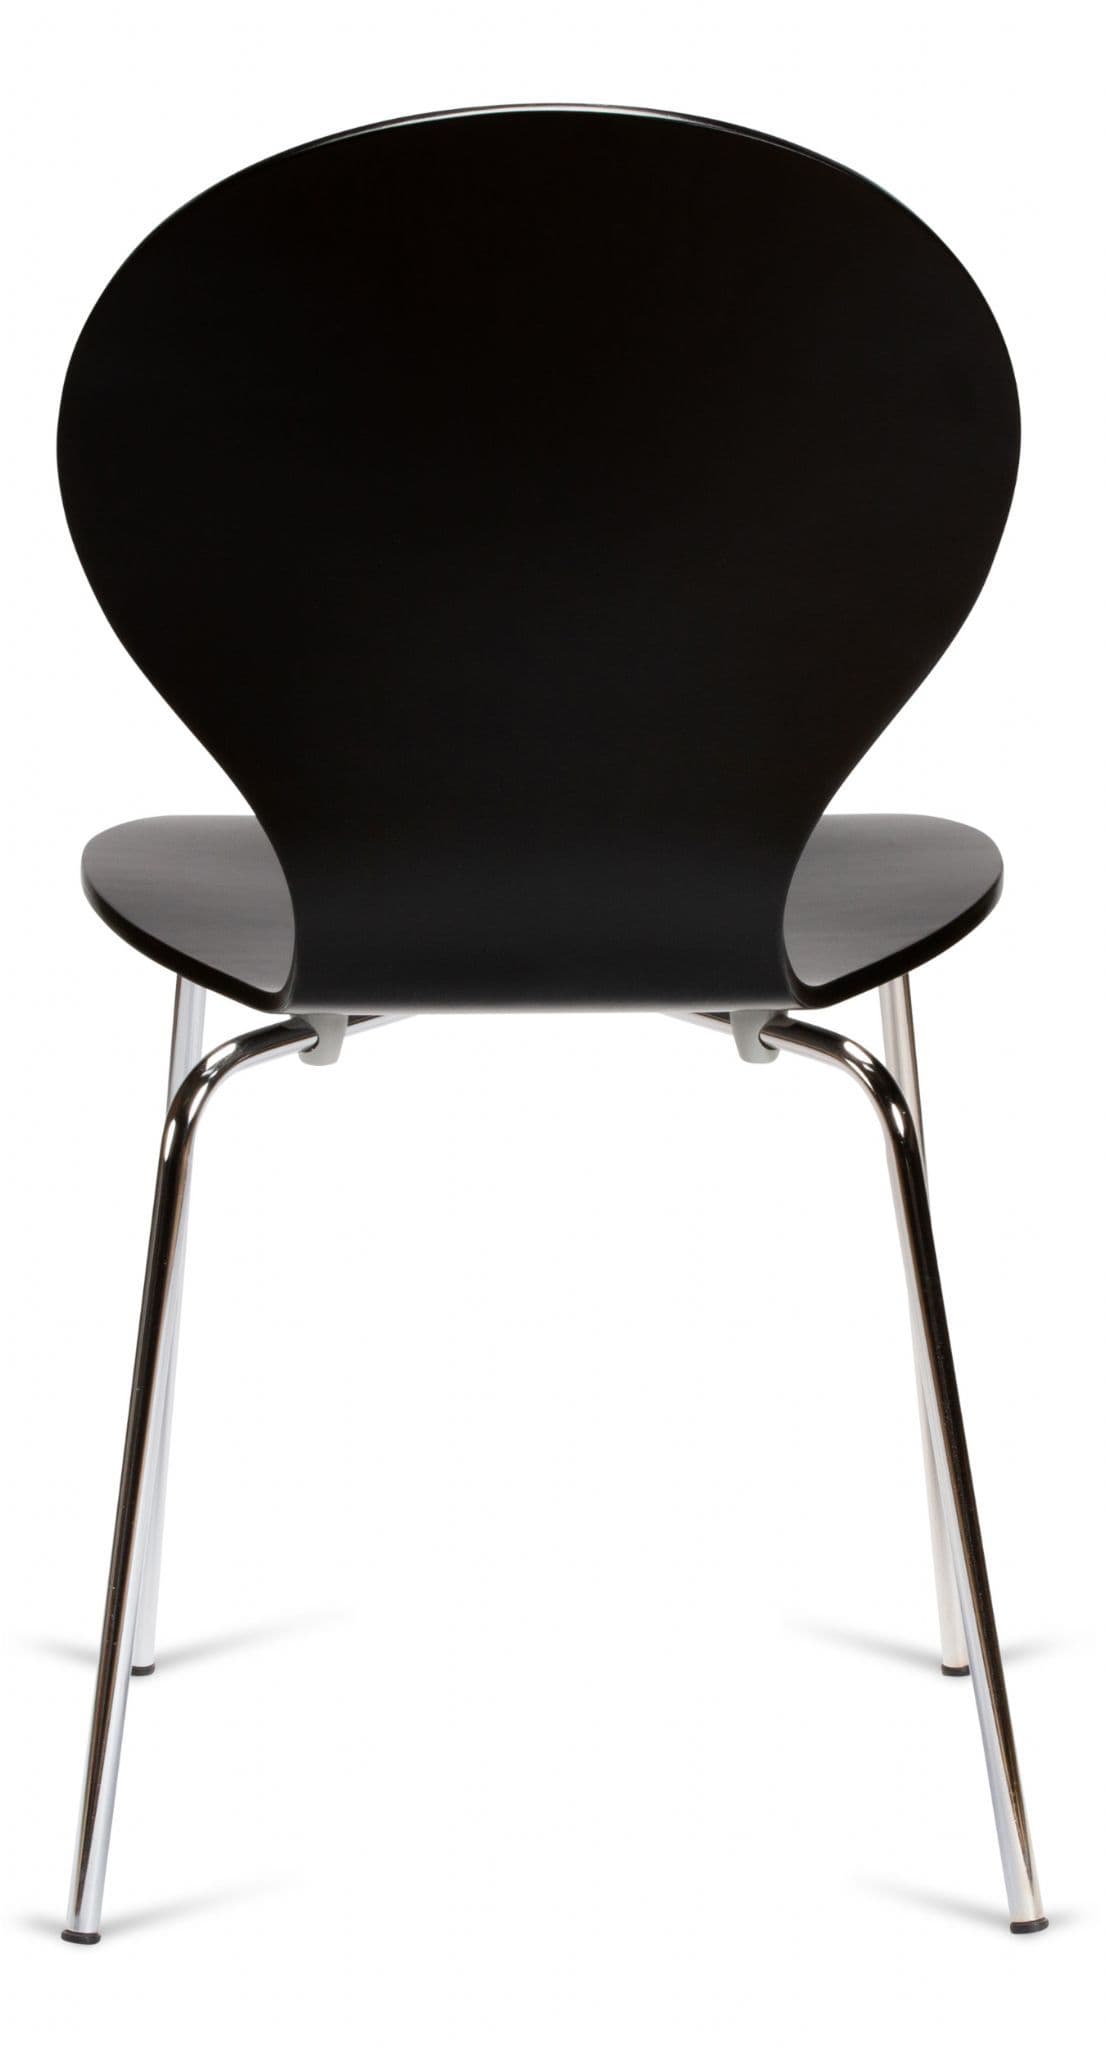 Kimberley Black & Chrome Dining Chairs Rear View